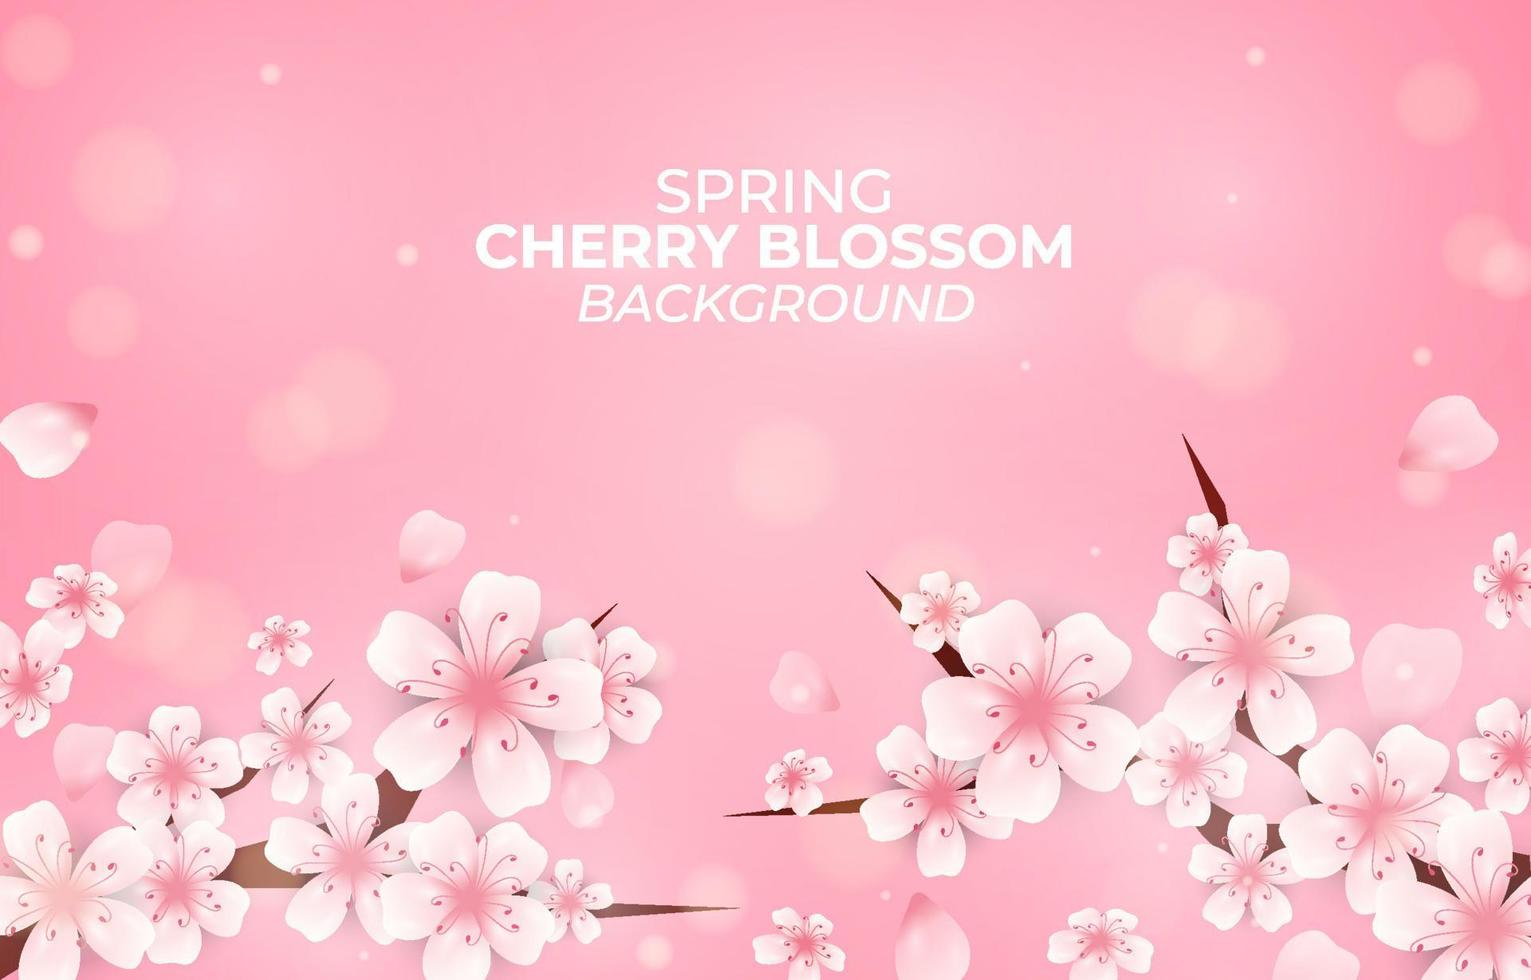 Background of Spring Cherry Blossom vector